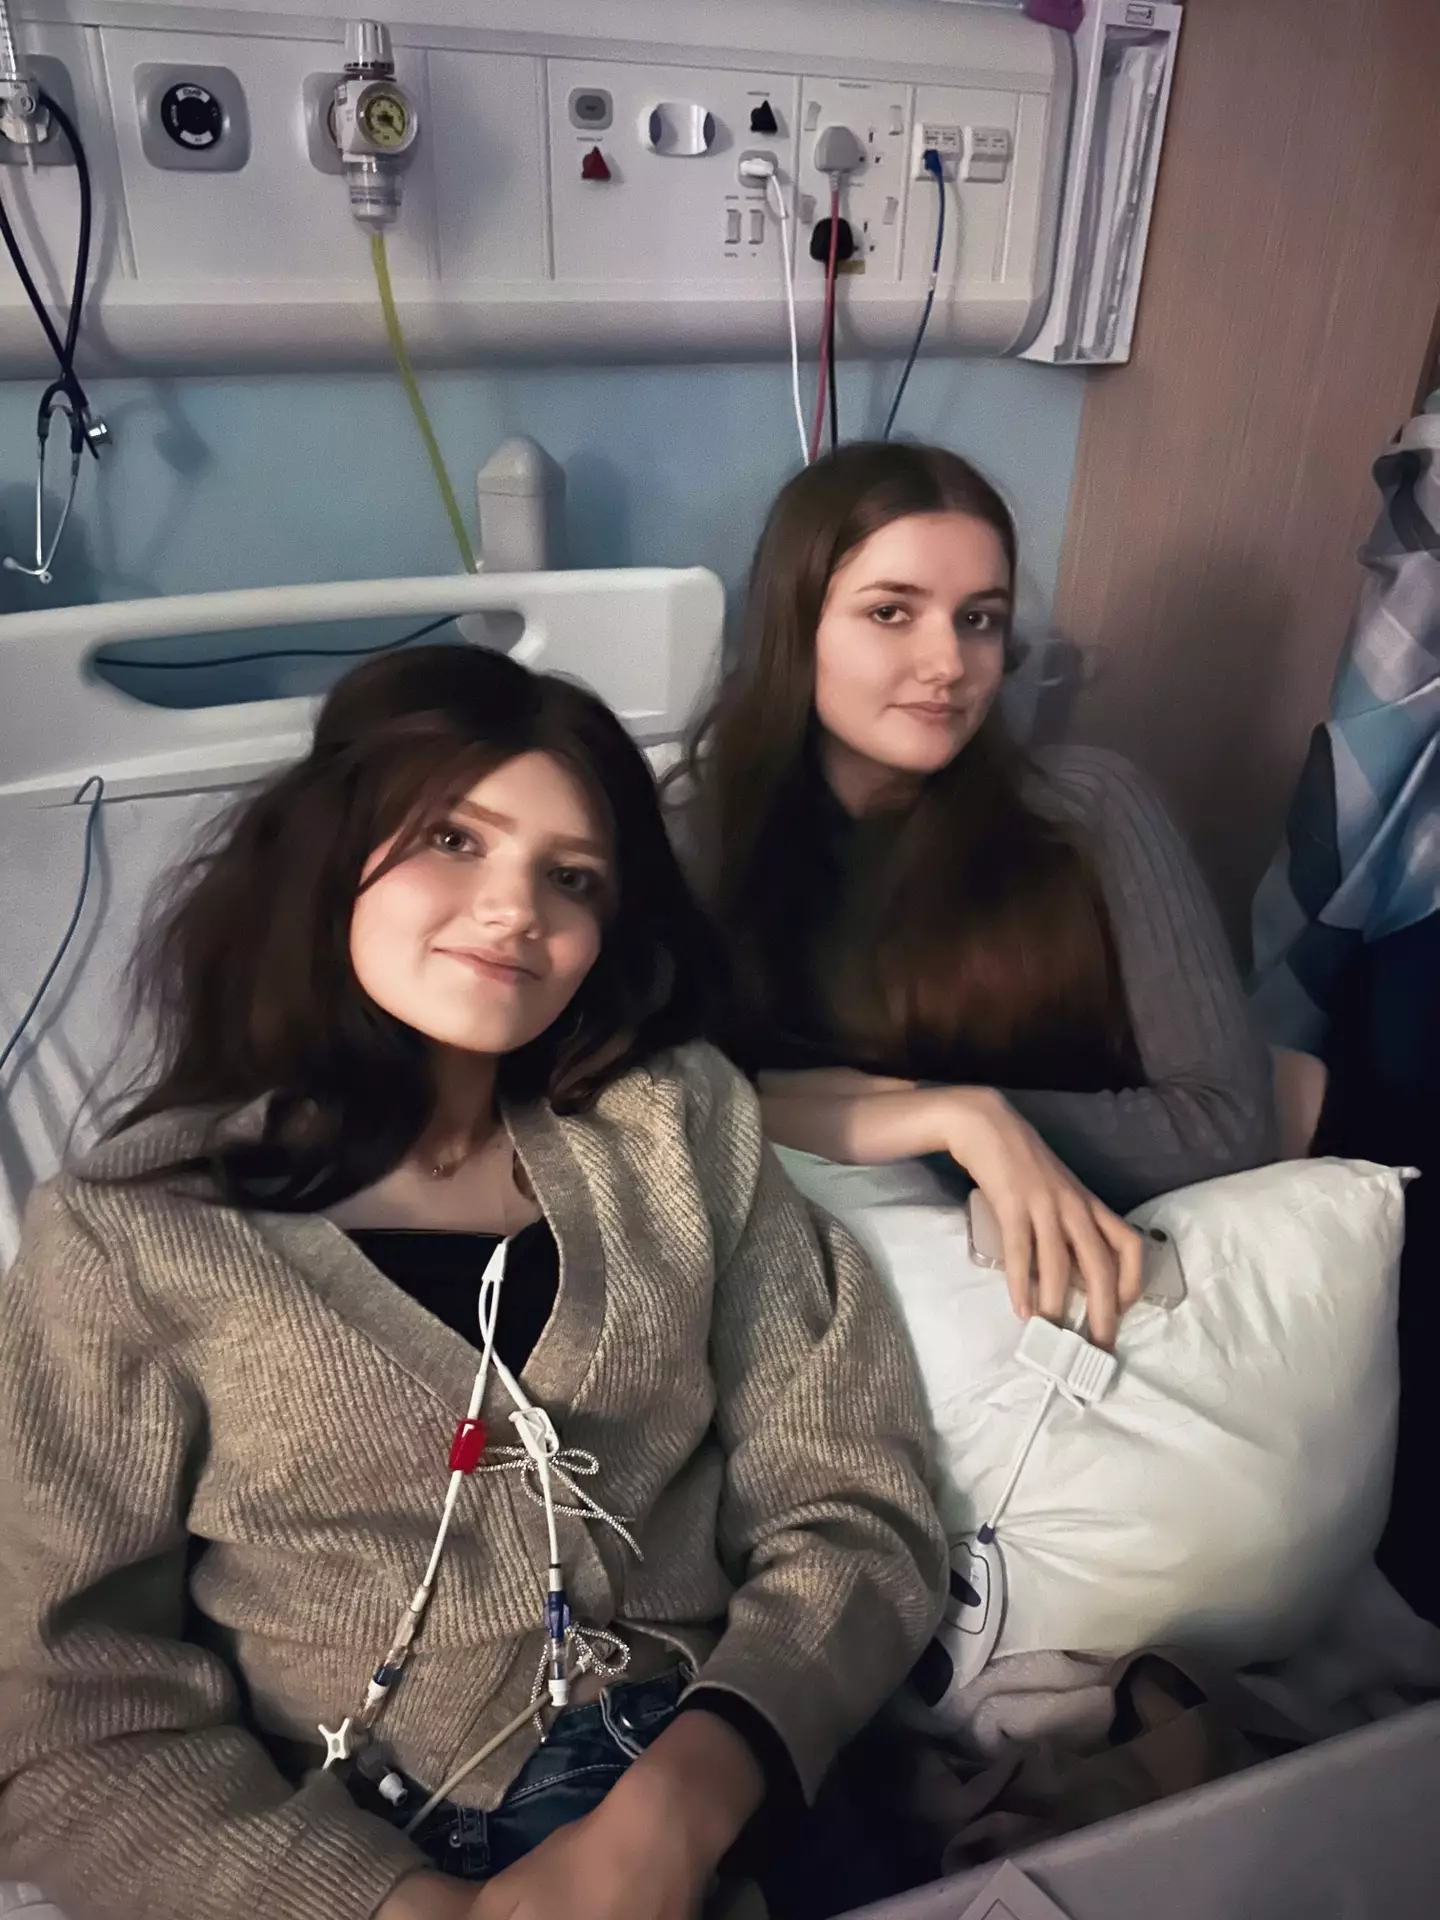 The teenage girl has 'bizarrely' suffered from the same cancer symptoms as her identical twin.